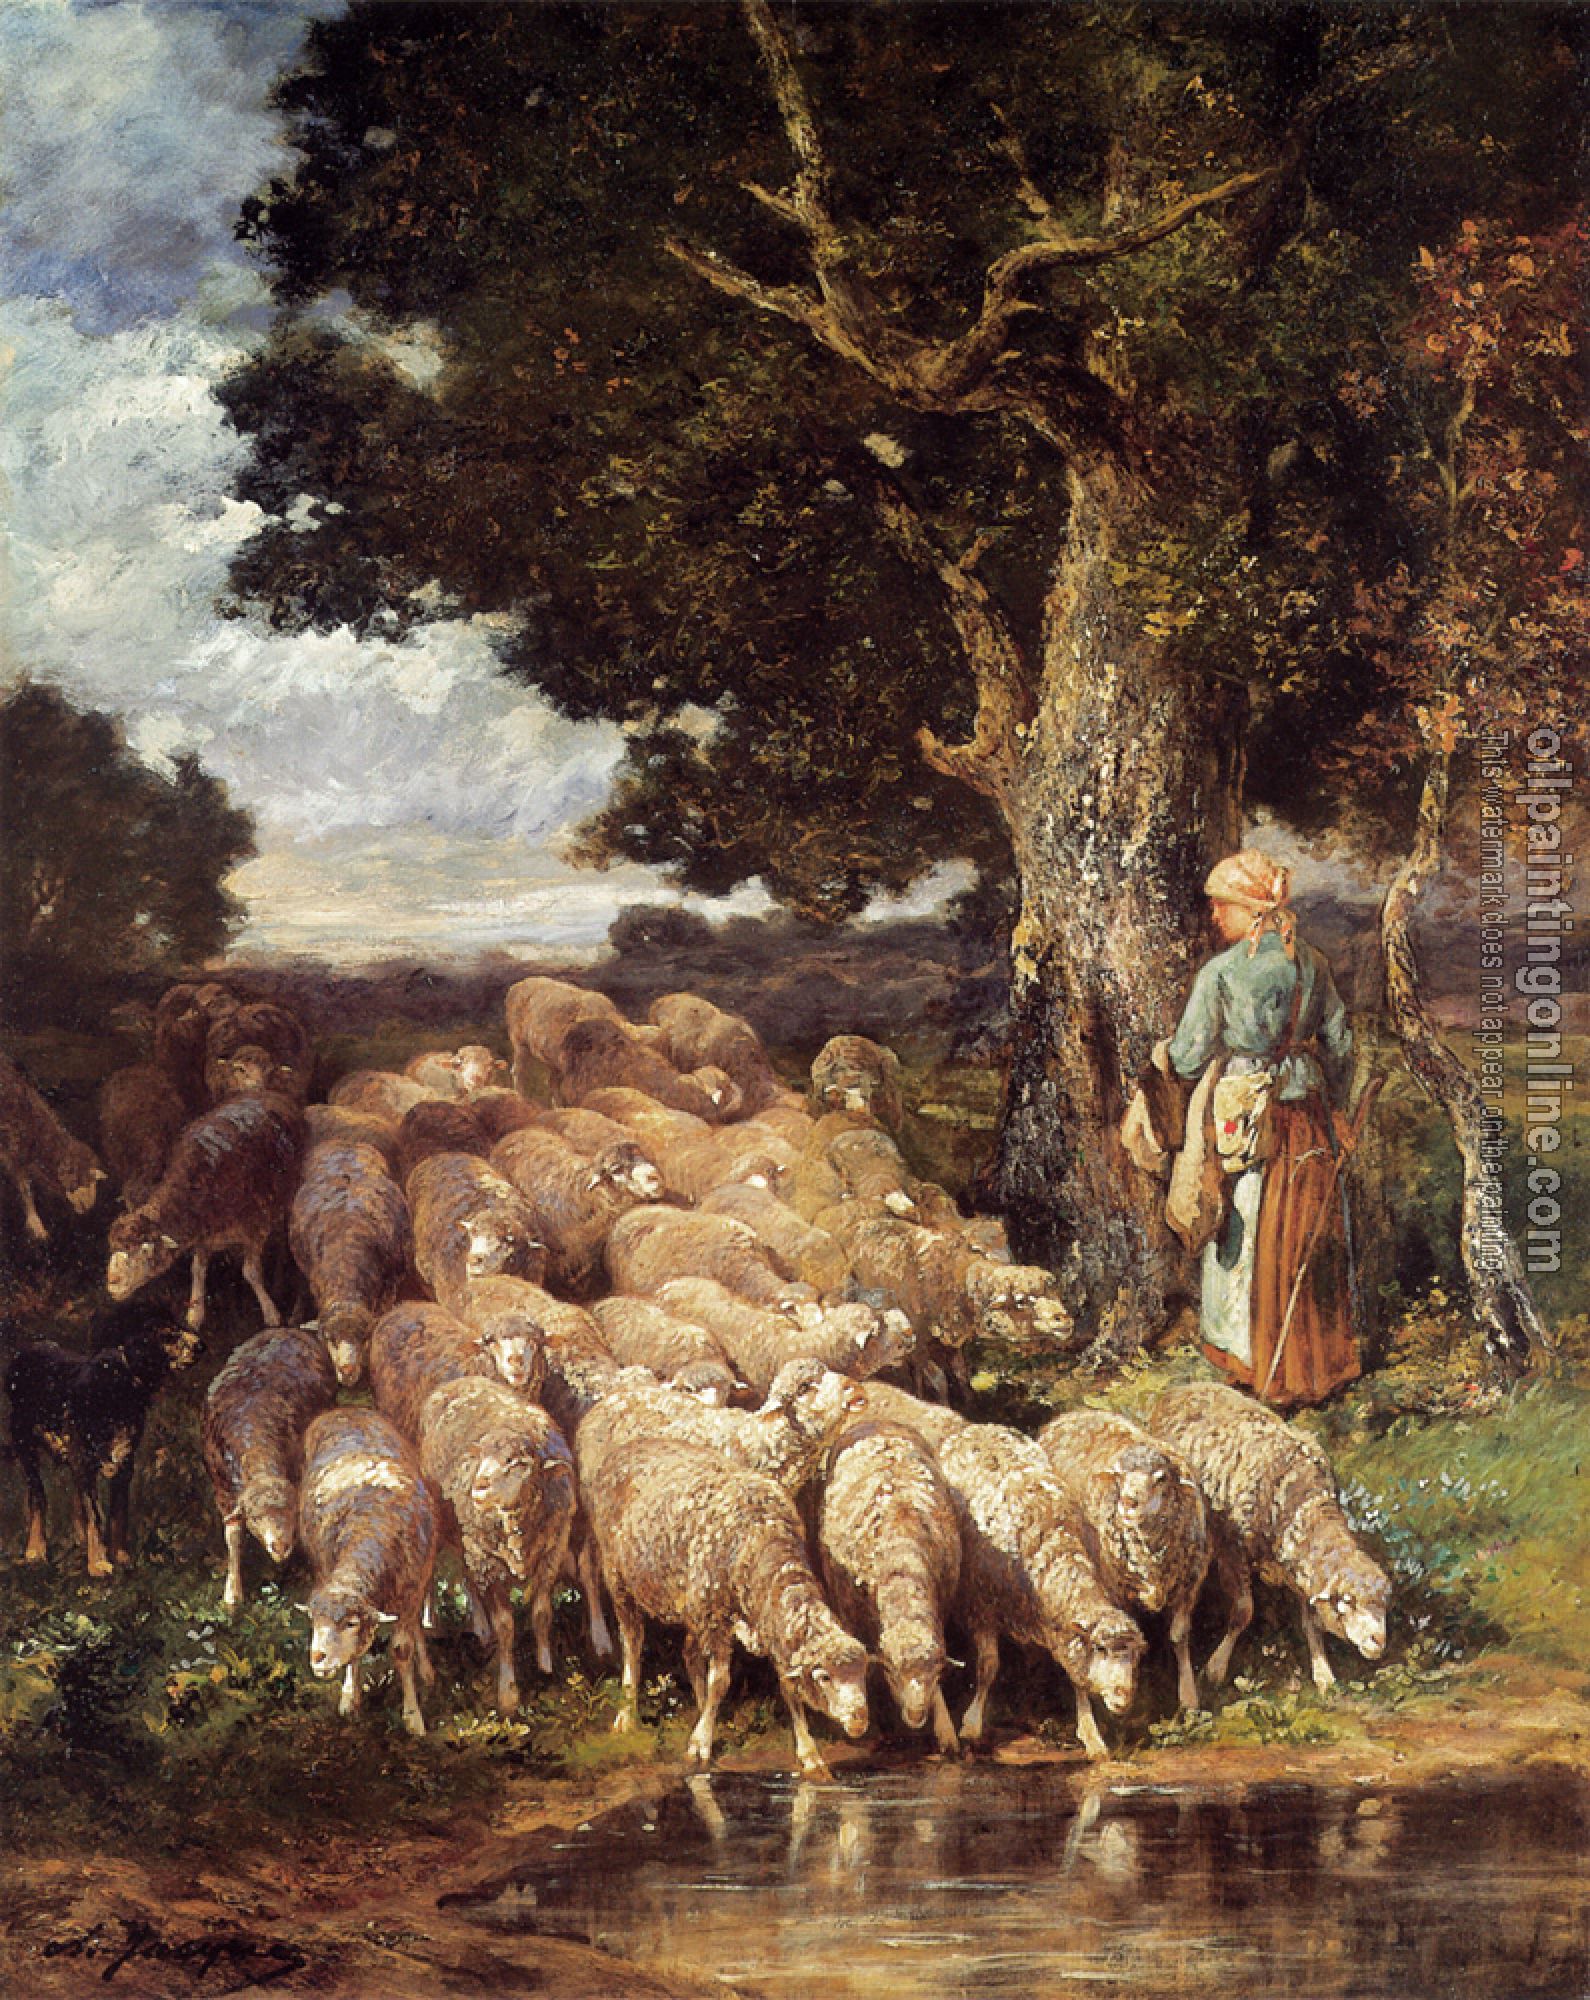 Charles Emile Jacque - A Shepherdess with her Flock near a Stream